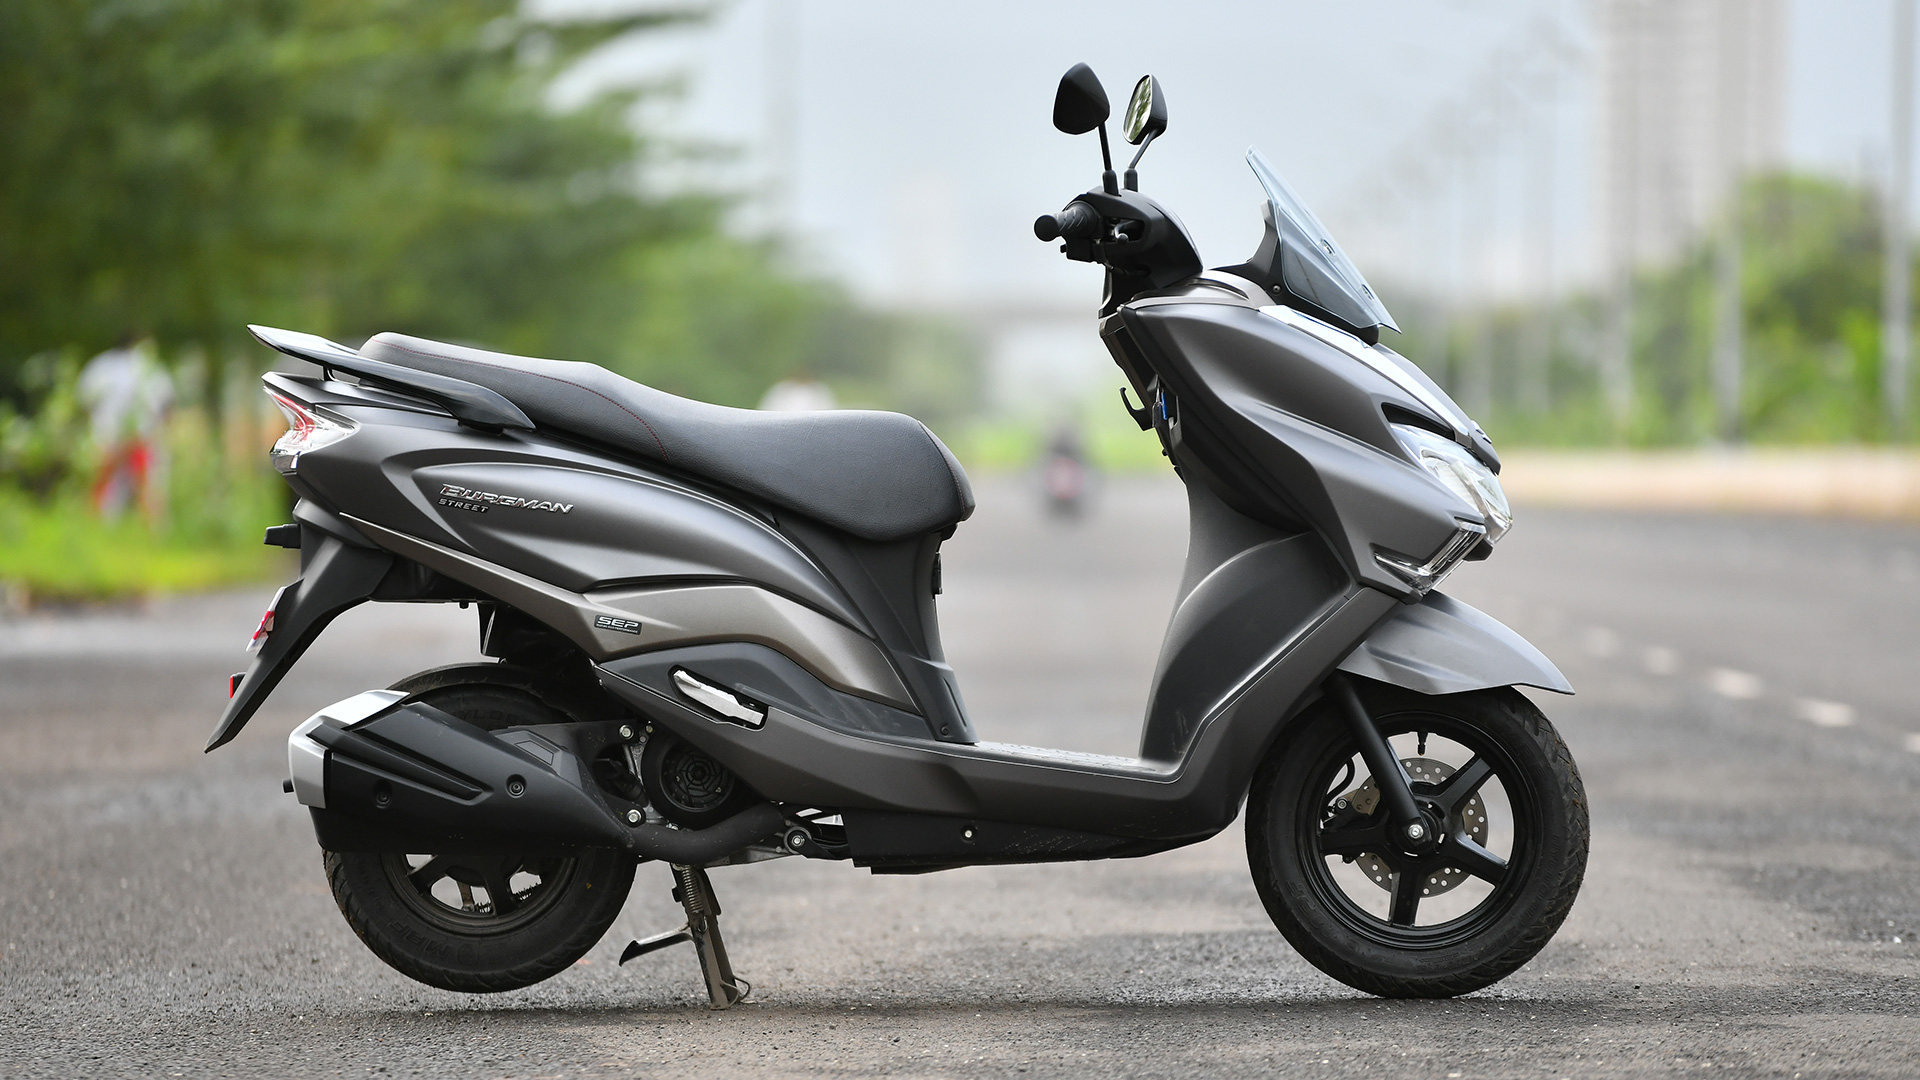 NEW Suzuki Burgman 125 is NOW available in South Africa